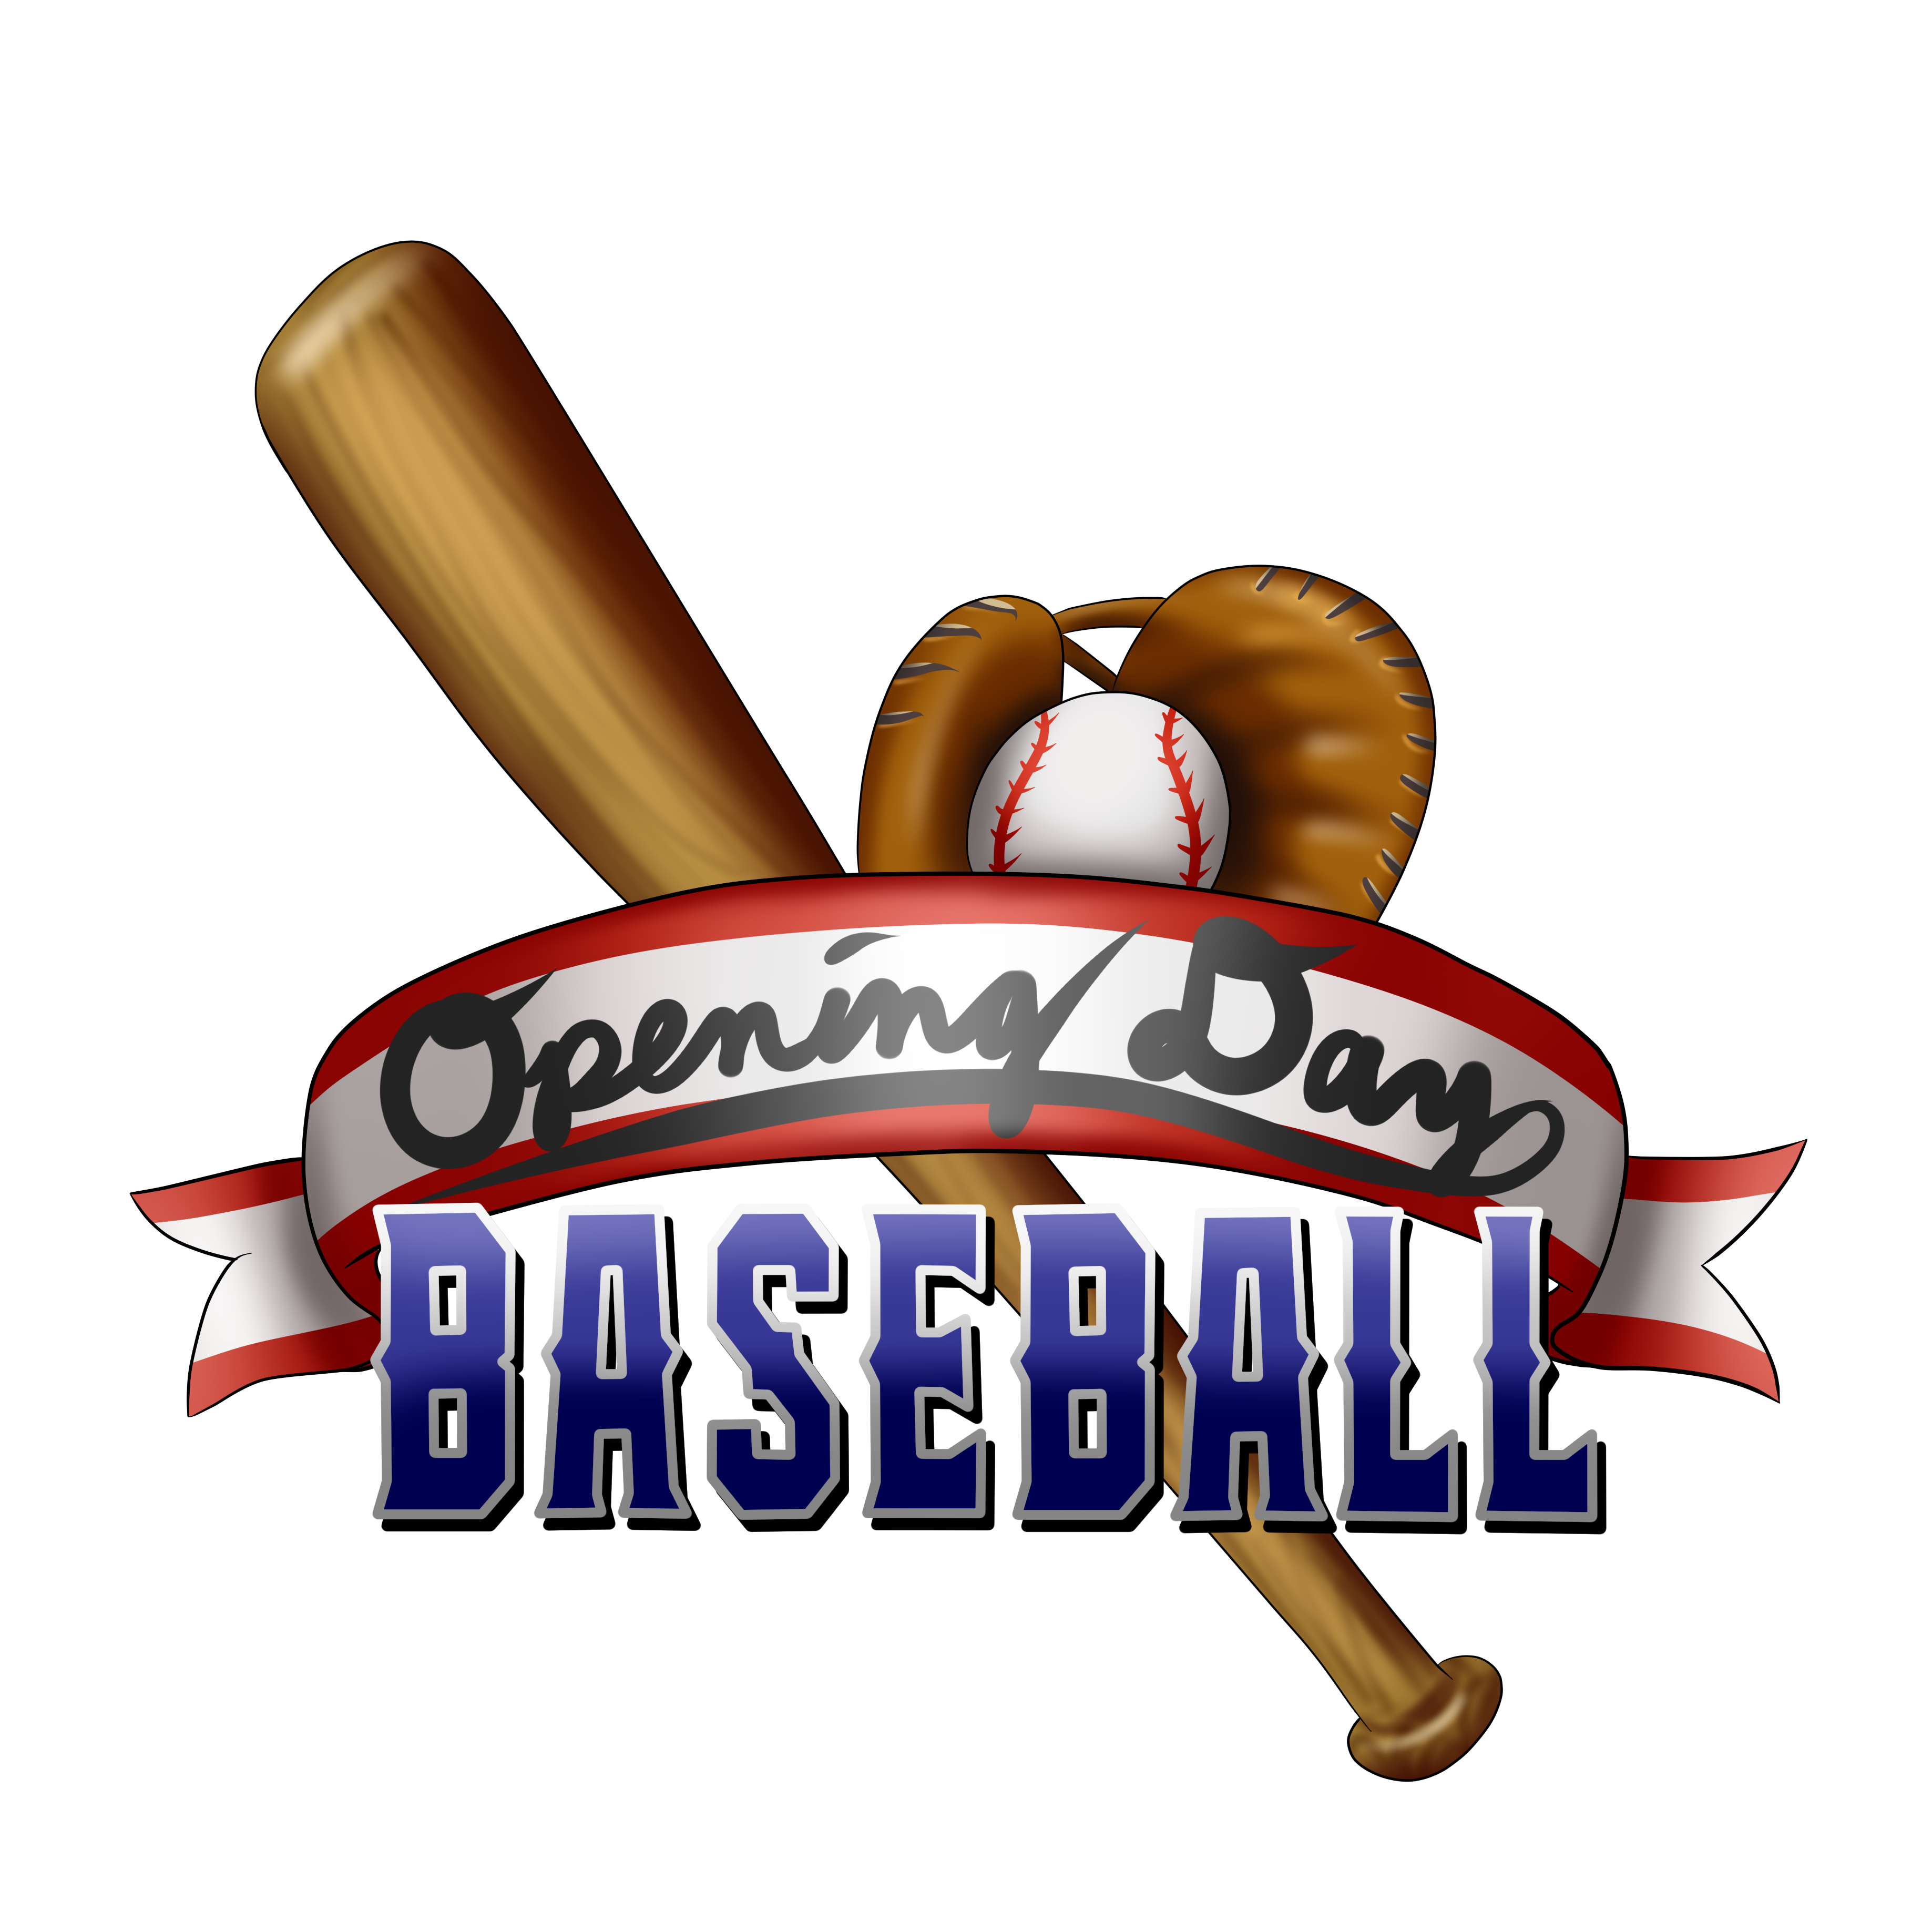 what-does-opening-day-mean-in-baseball-ouestny